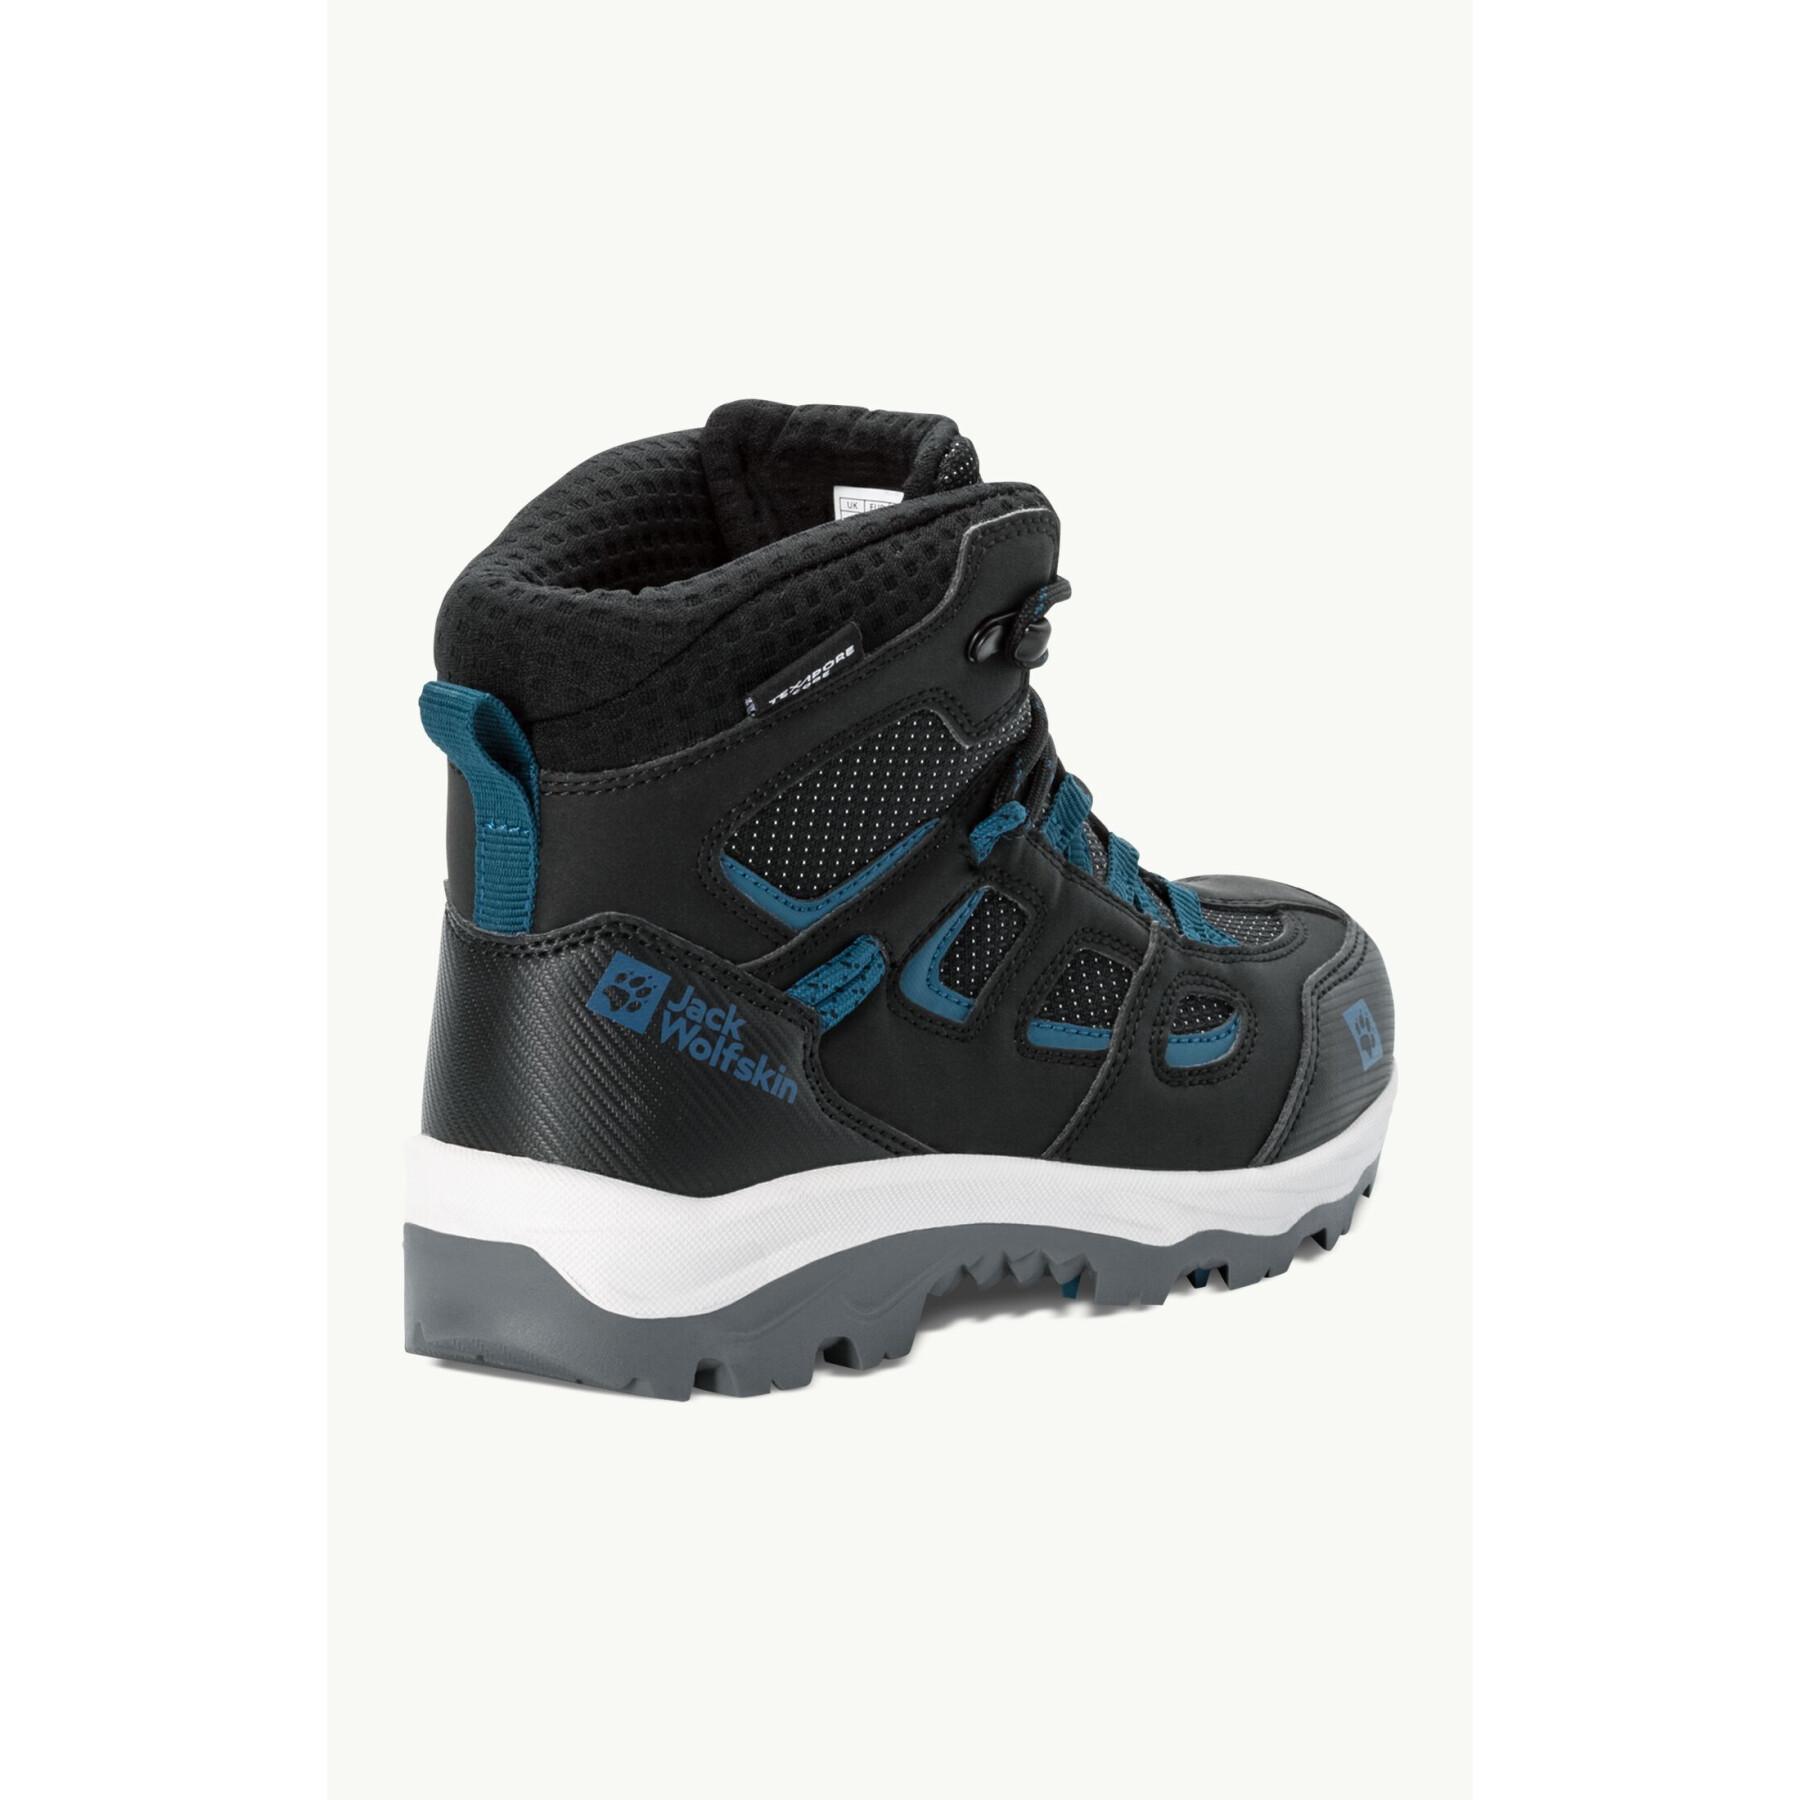 Hiking shoes Jack Wolfskin Vojo Texapore Mid